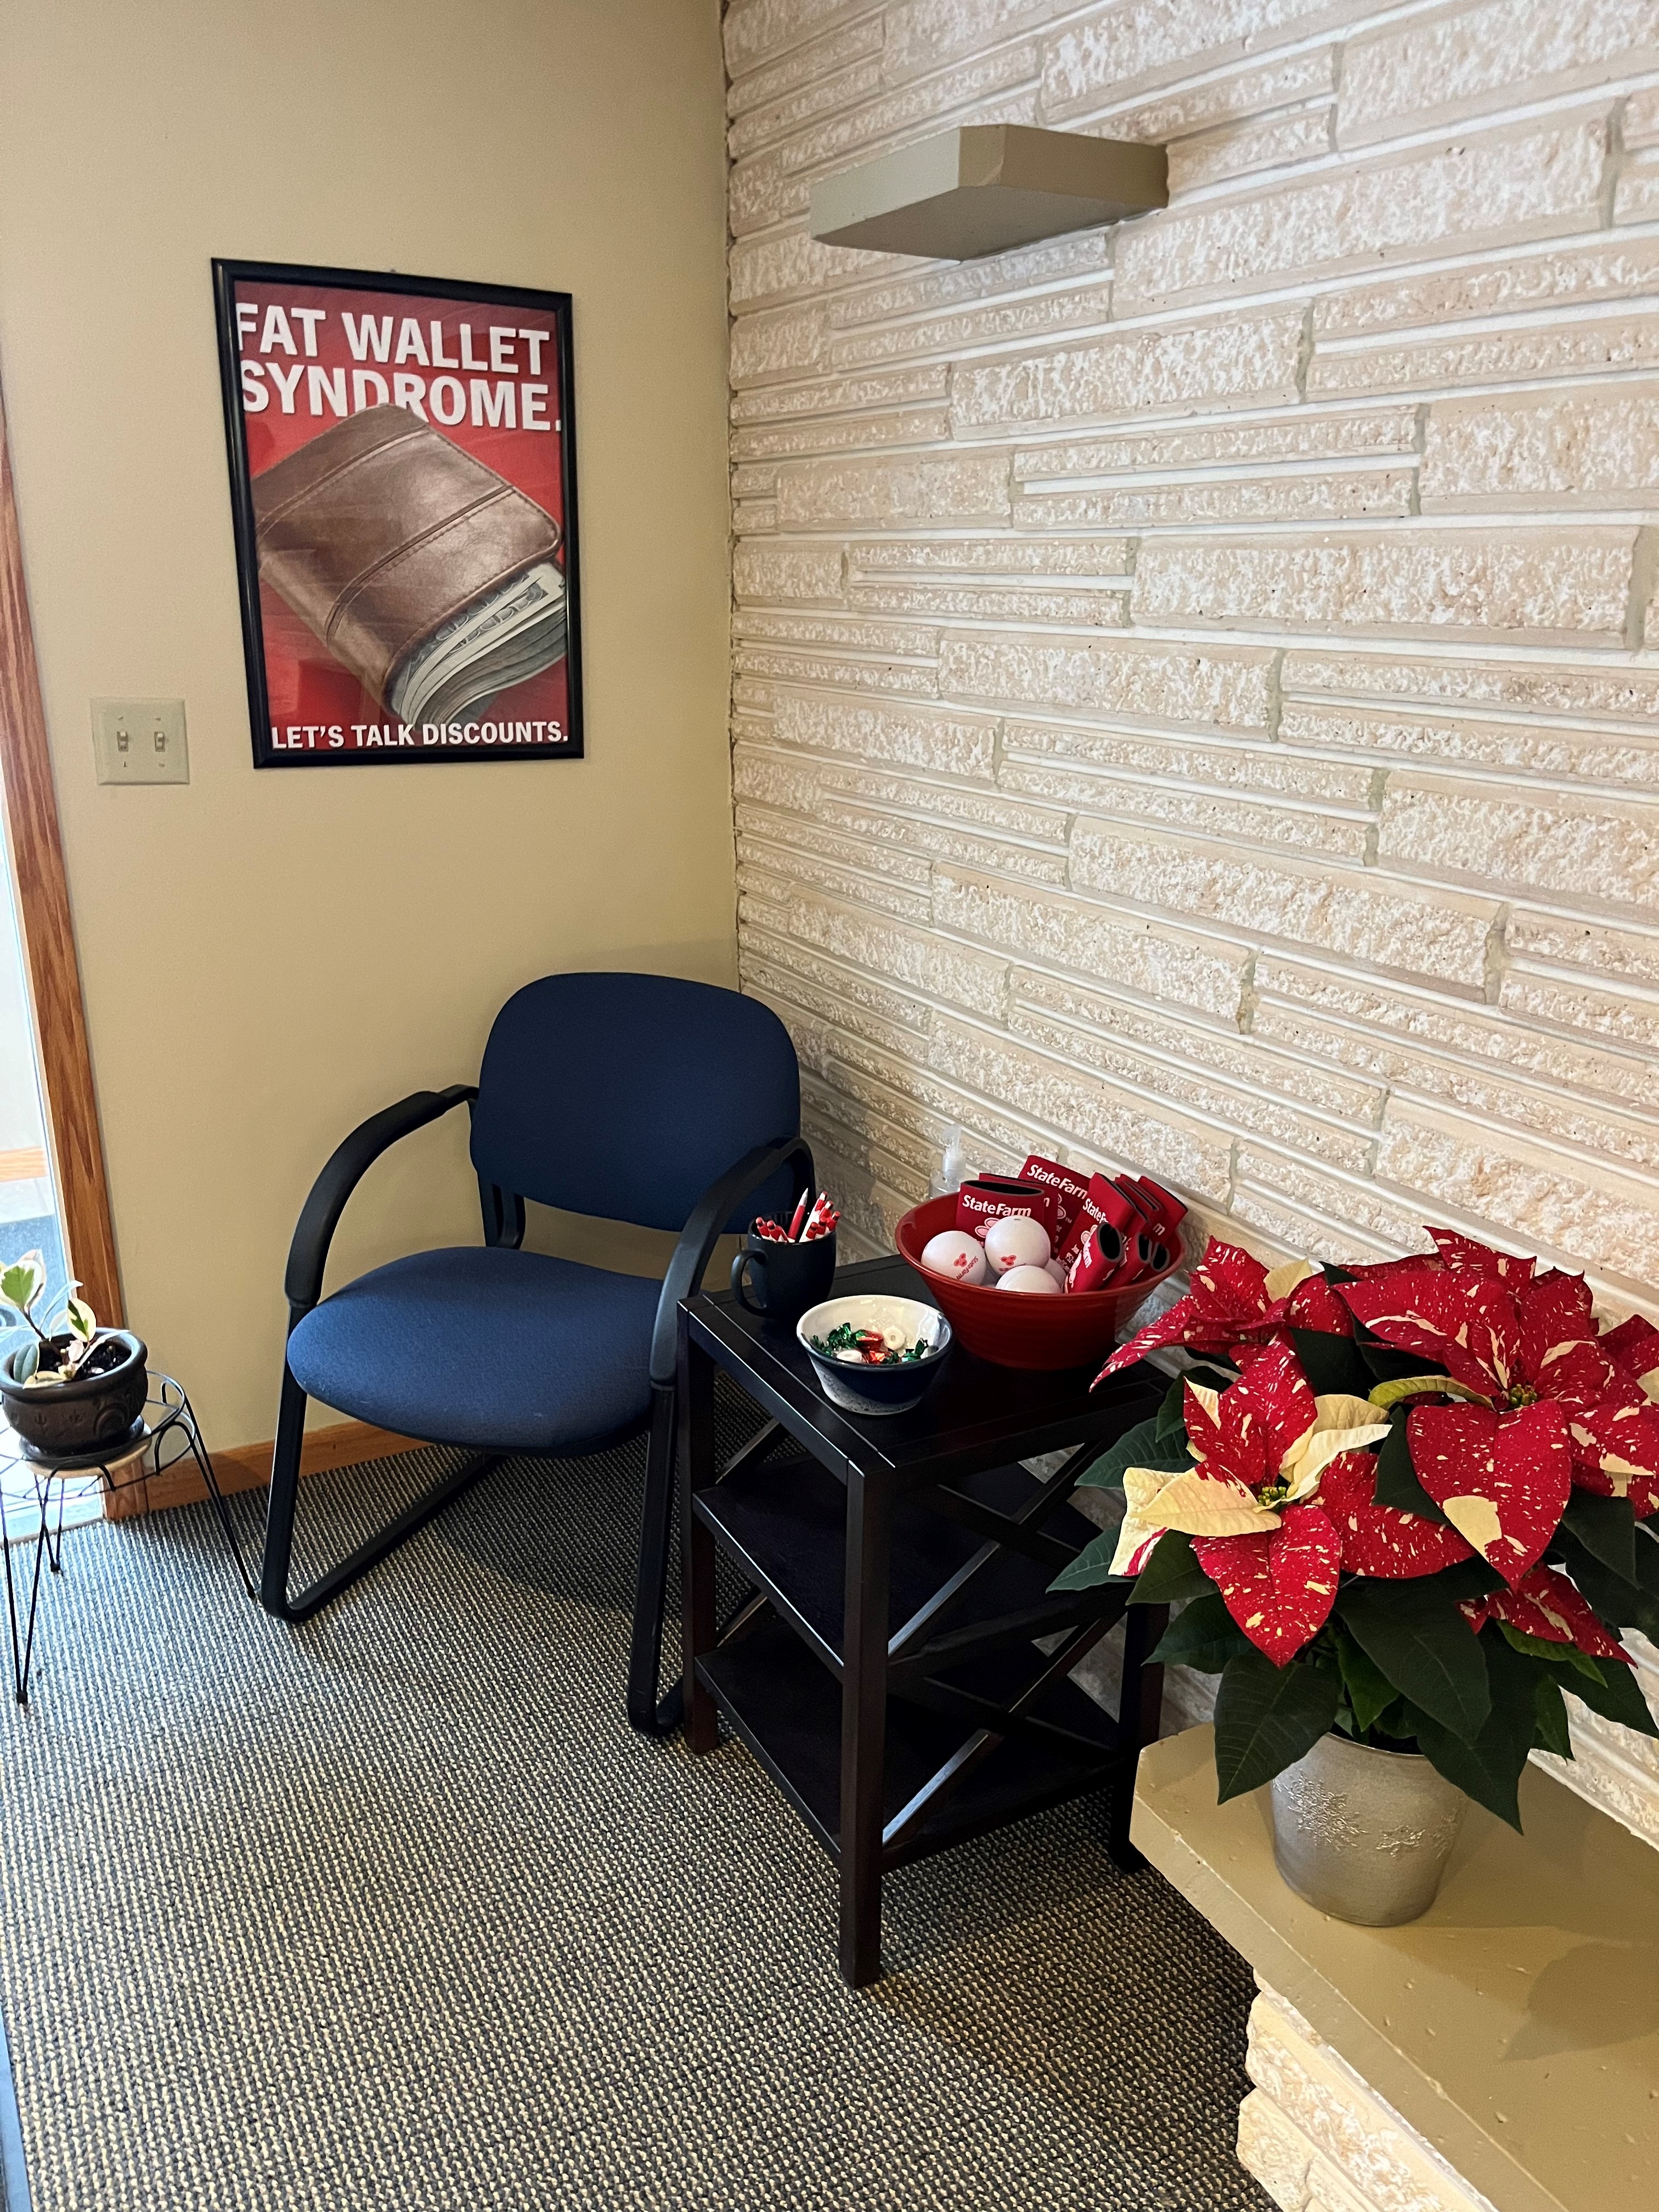 We're in the Christmas spirit over here at Joe O'Connor State Farm! Call or stop by for a free car insurance quote!